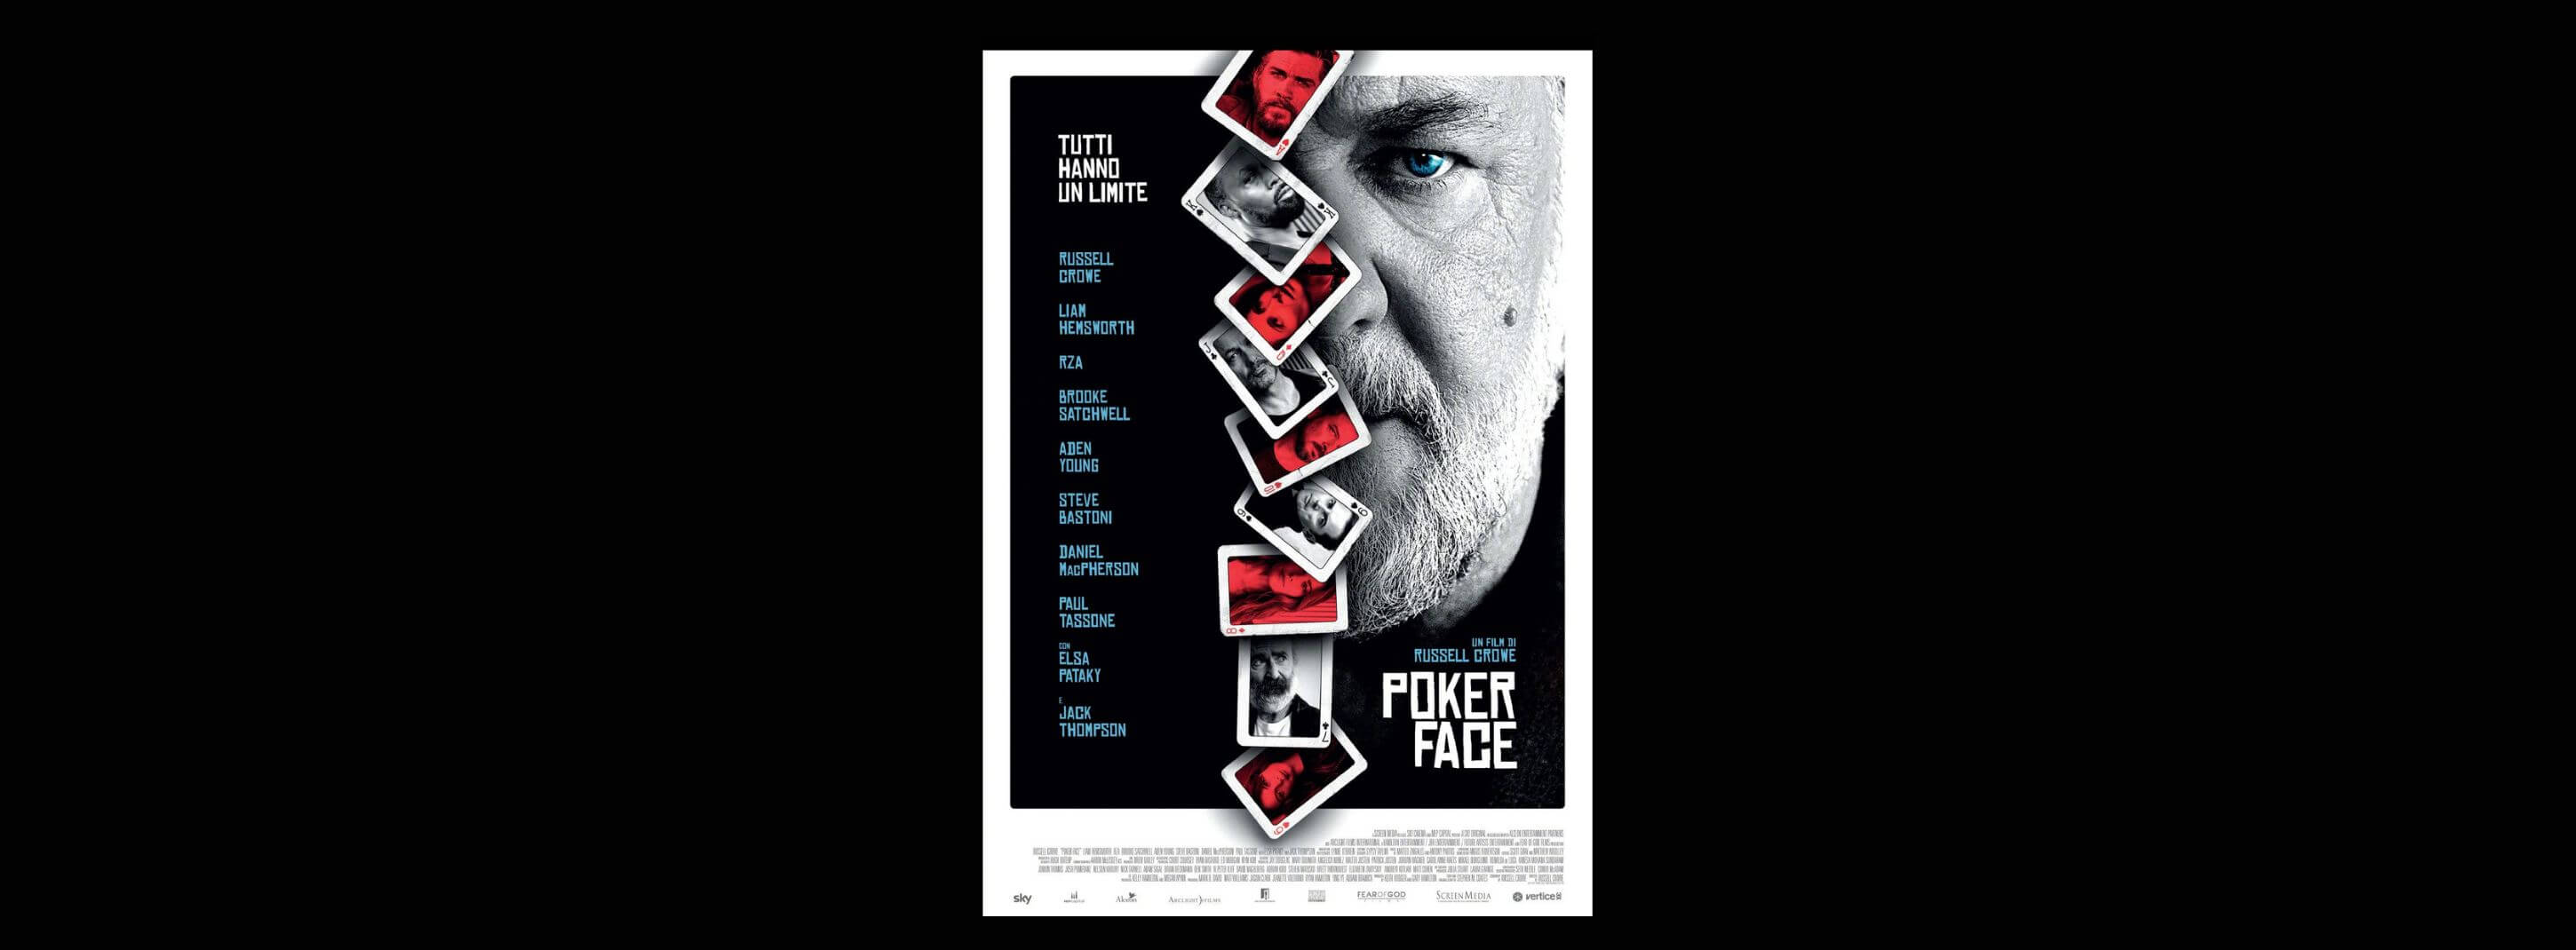 Russell Crowe Stars In New Thriller: Poker Face